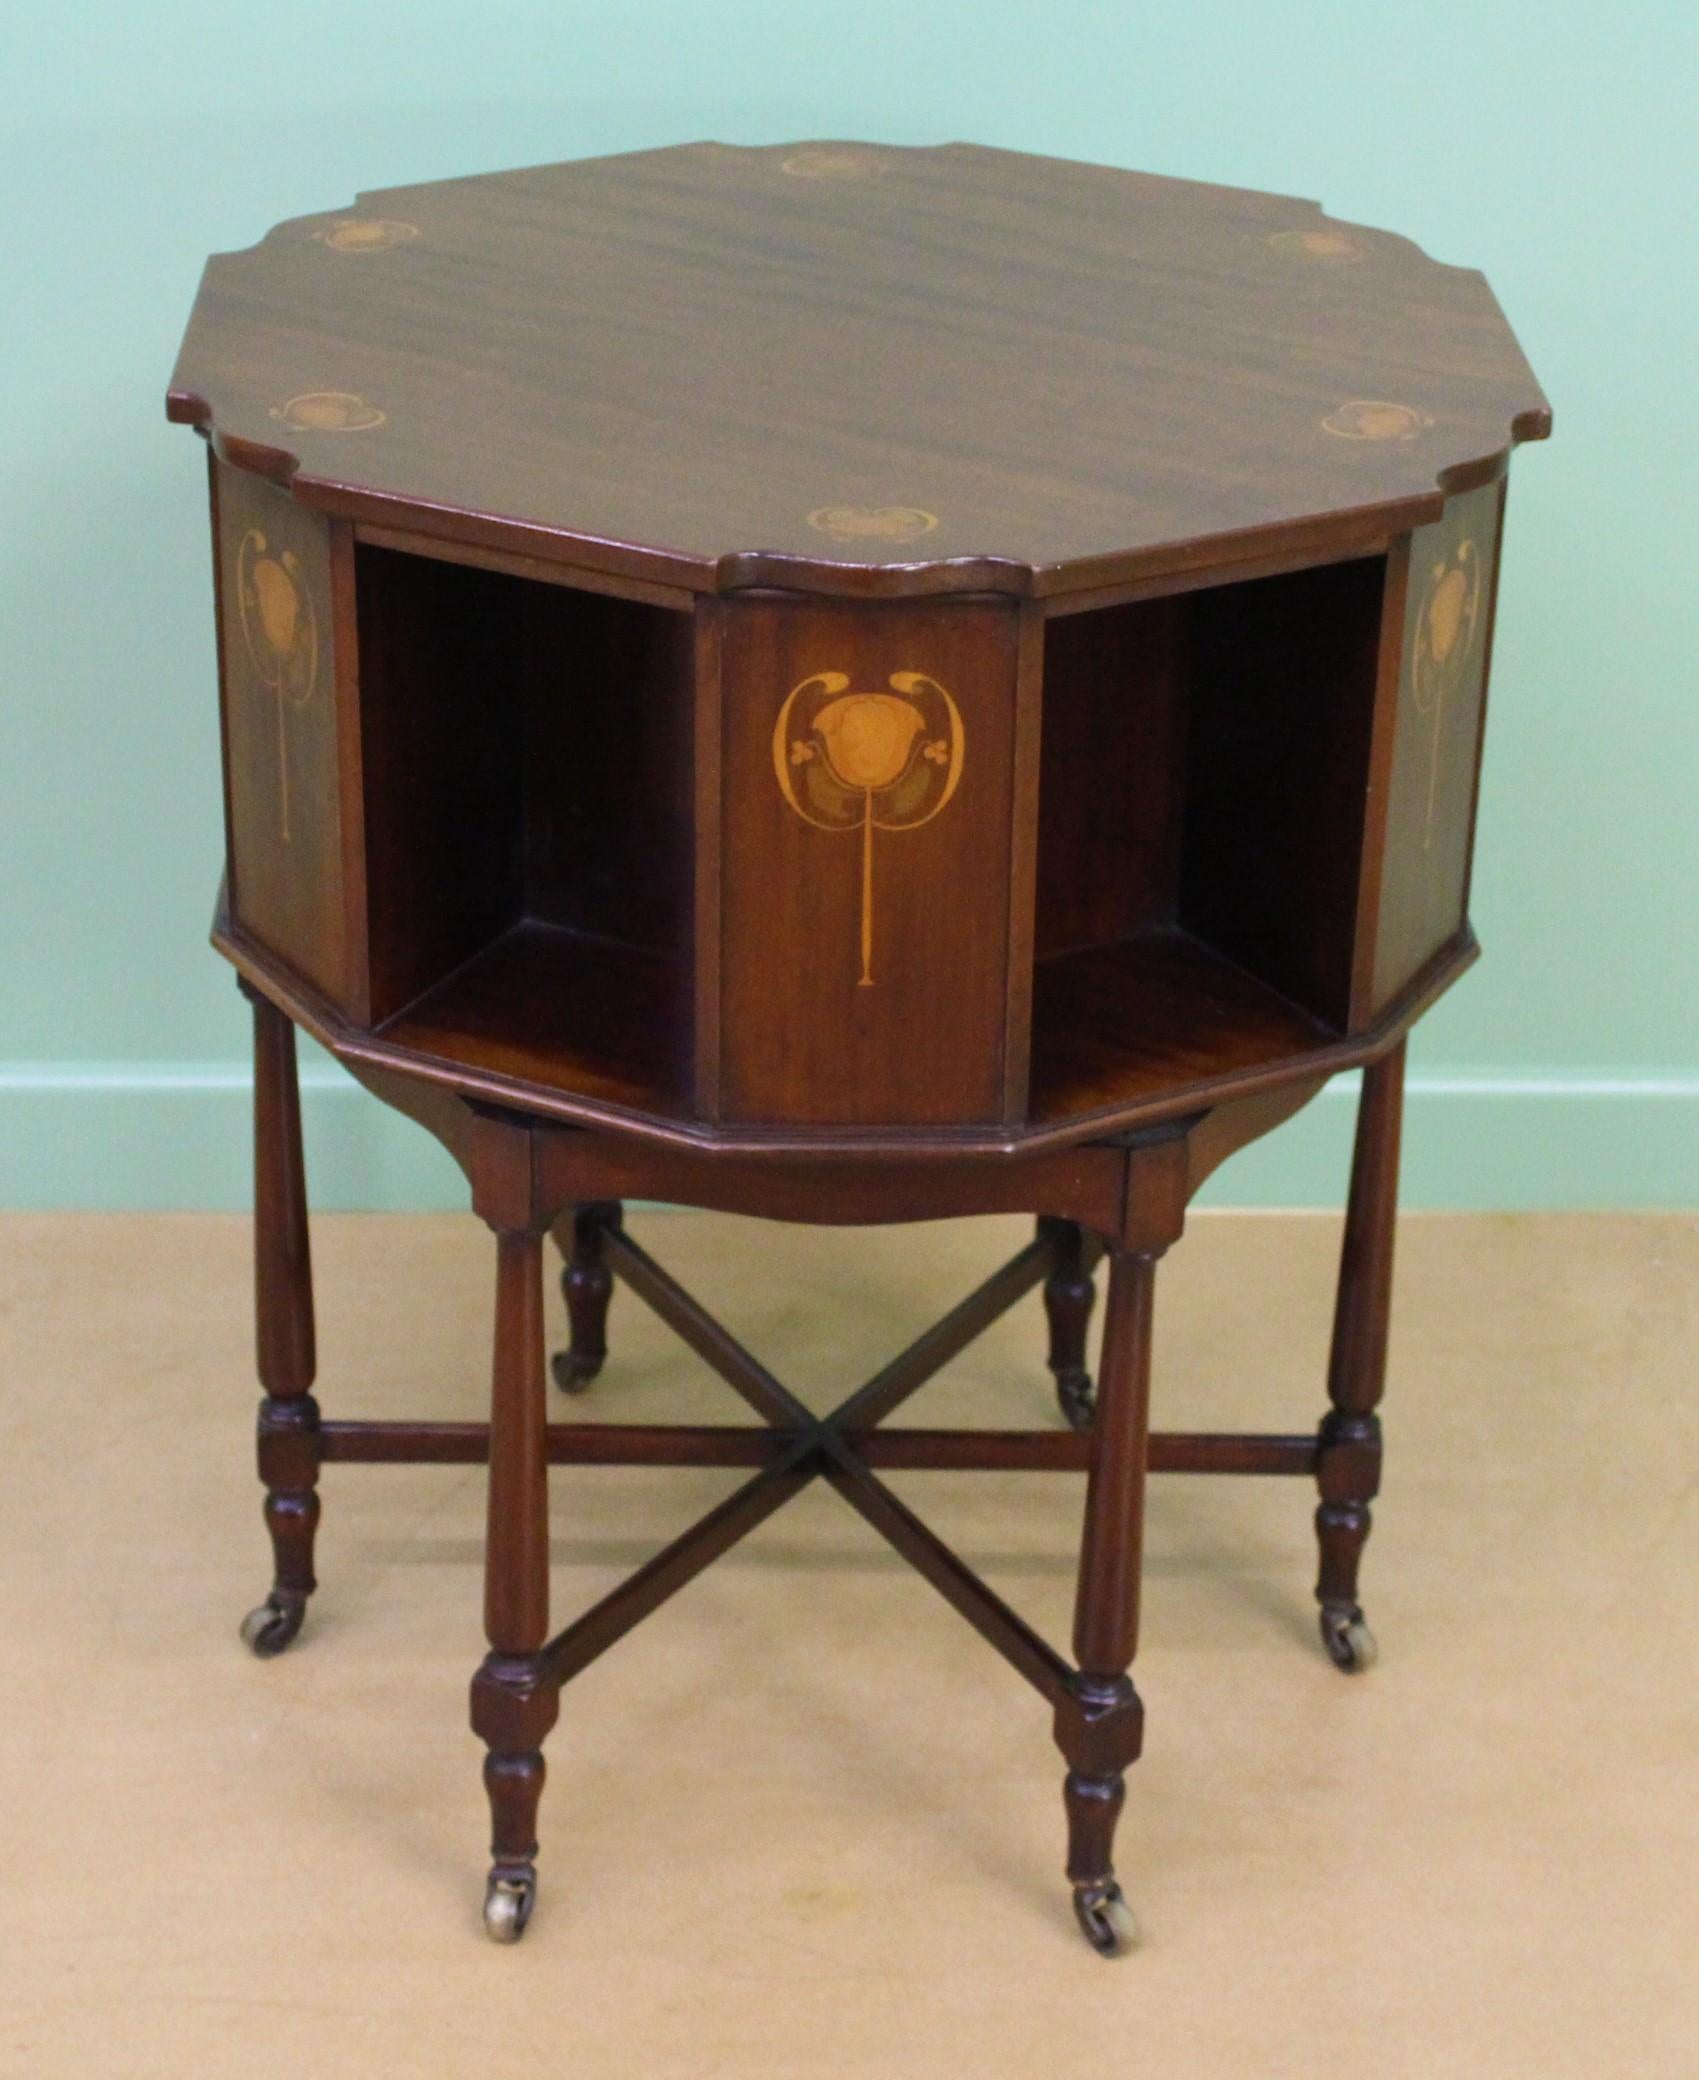 A charming Art Nouveau period inlaid mahogany book table. Well made in solid mahogany and decorated with stylized floral motifs to the top and sides. Standing on 6 turned legs which terminate in their original castors and are united by